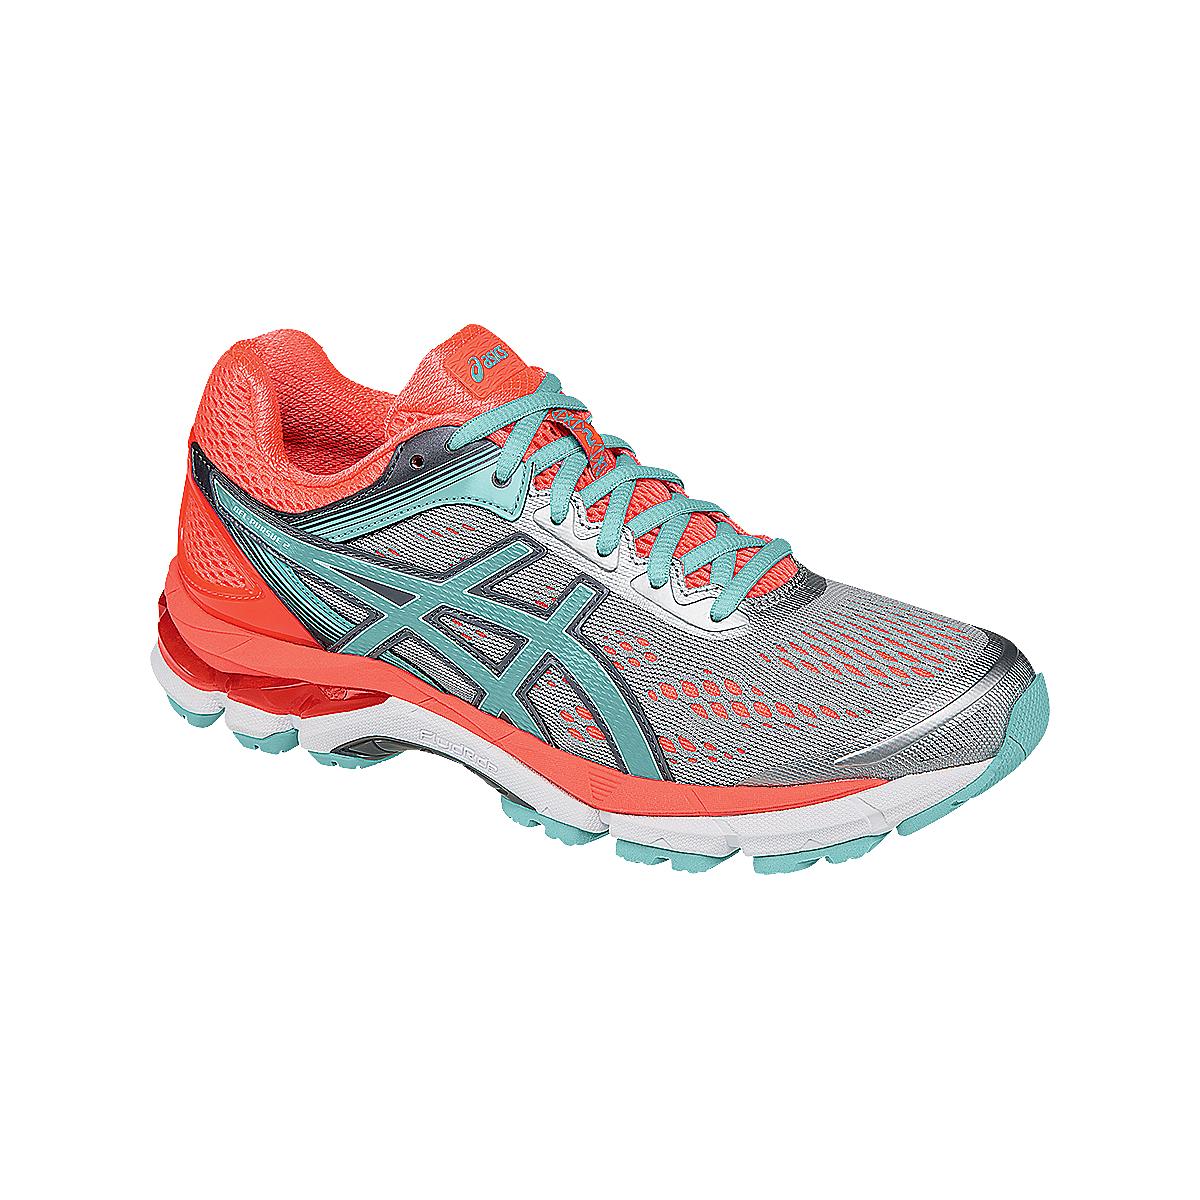 Asics Forefoot Running Shoes | Road Runner Sports | Asics Forefoot ...